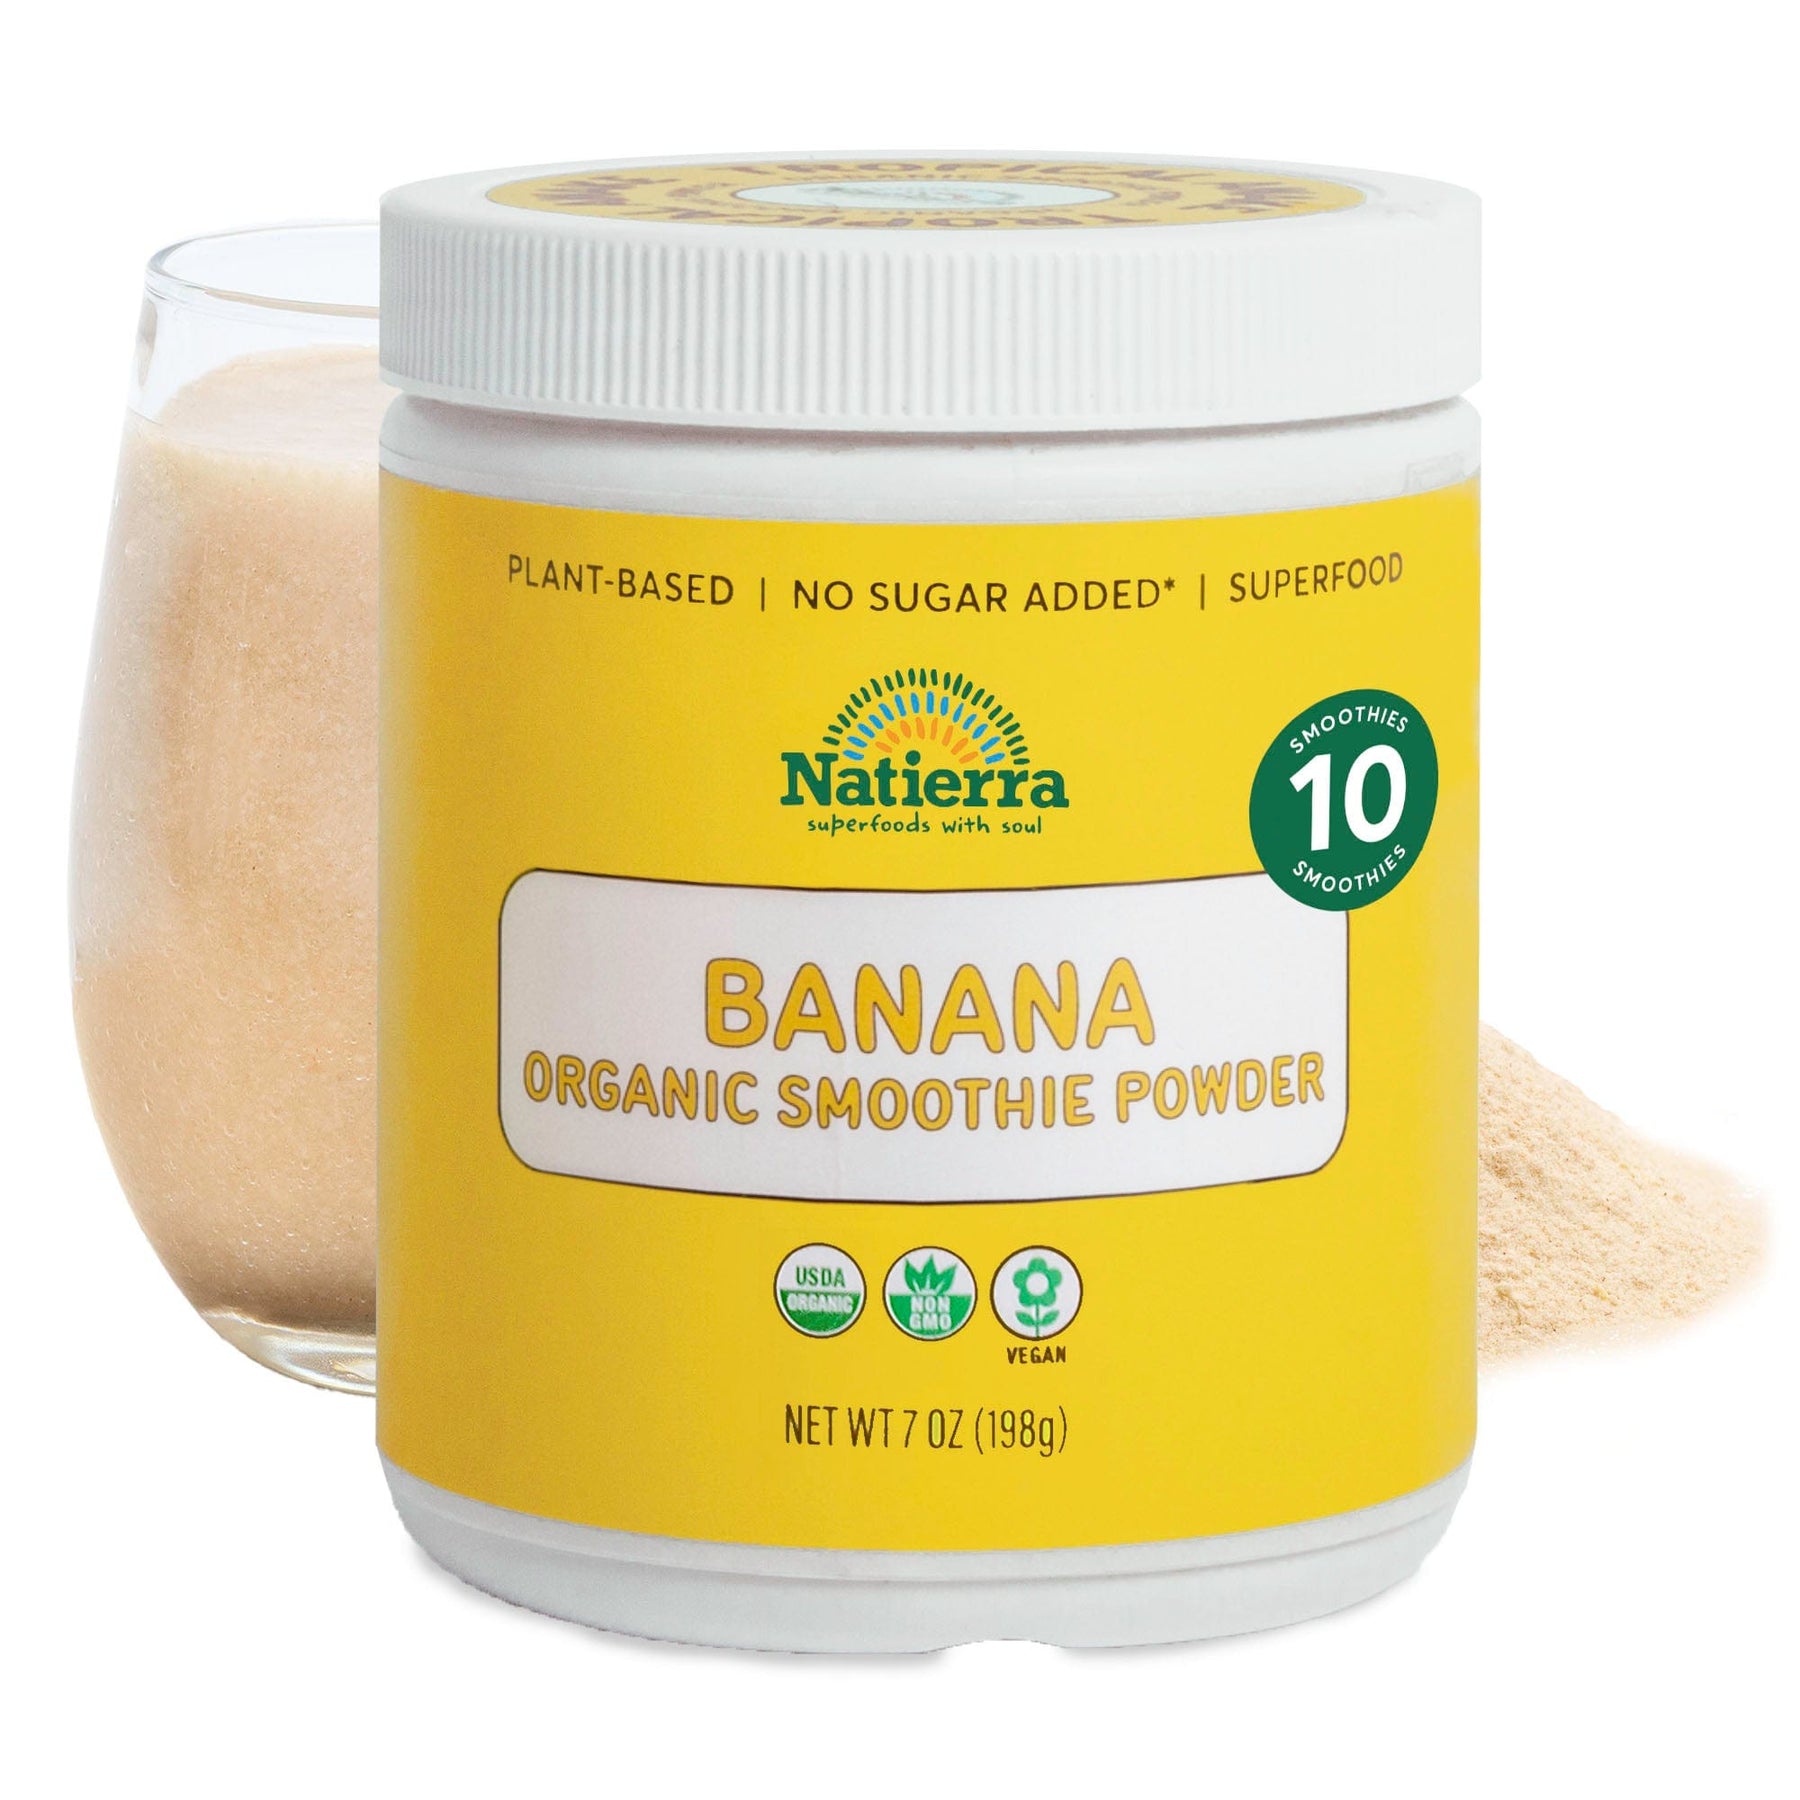 Natierra Banana Organic Smoothie jar with glass and powder in the background